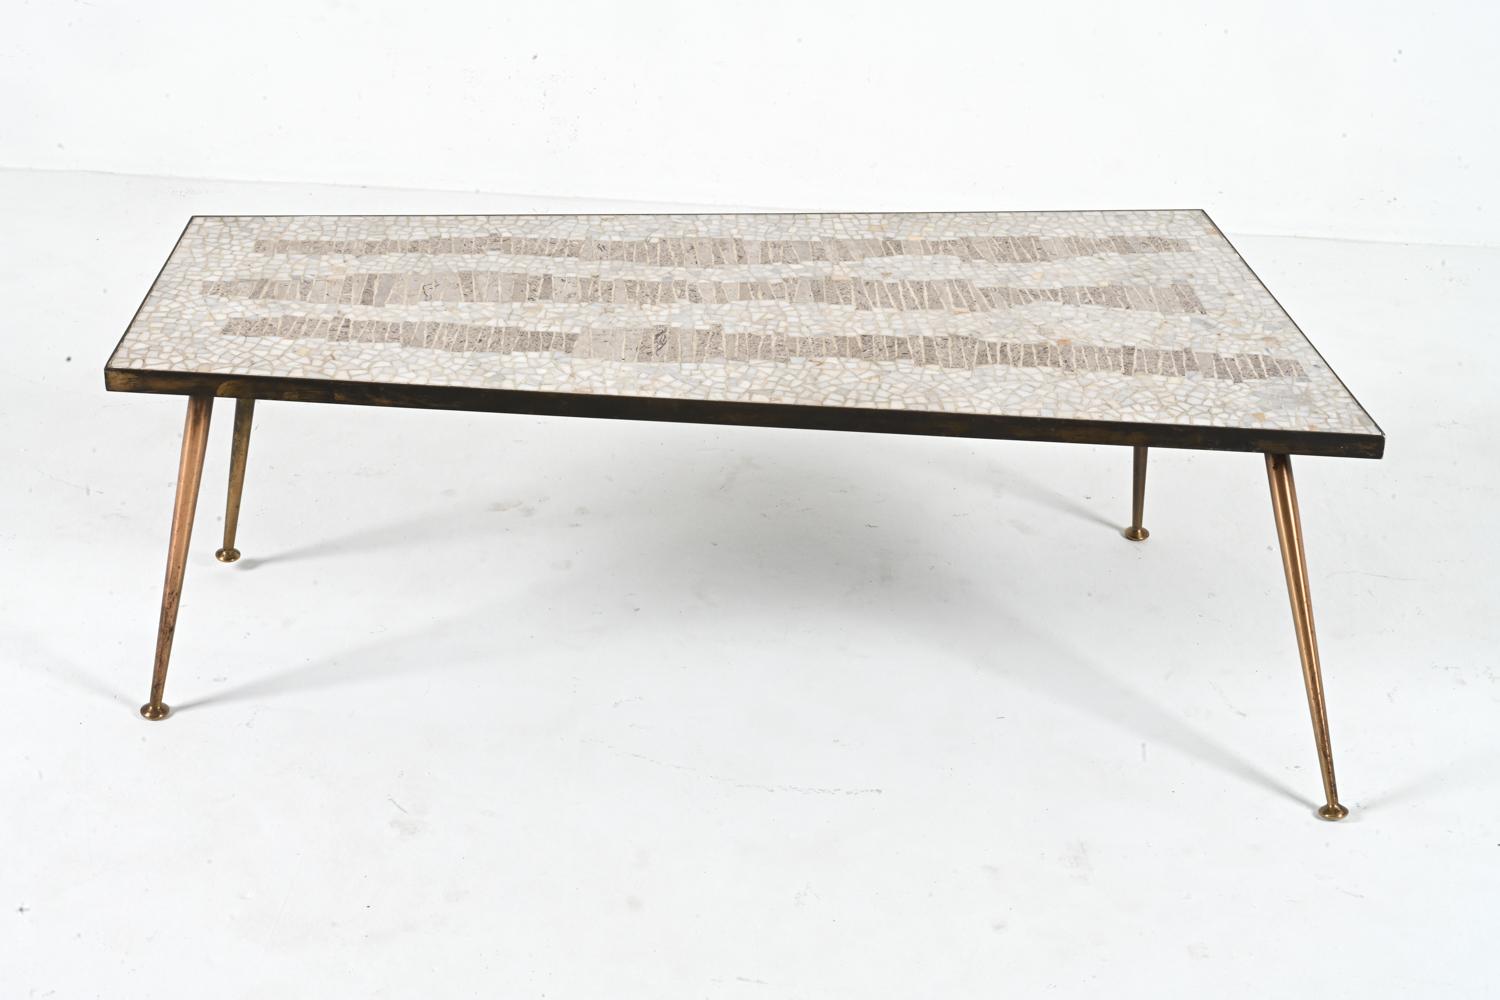 Berthold Muller Brass & Stone Mosaic Coffee Table, Germany, c. 1950's For Sale 7